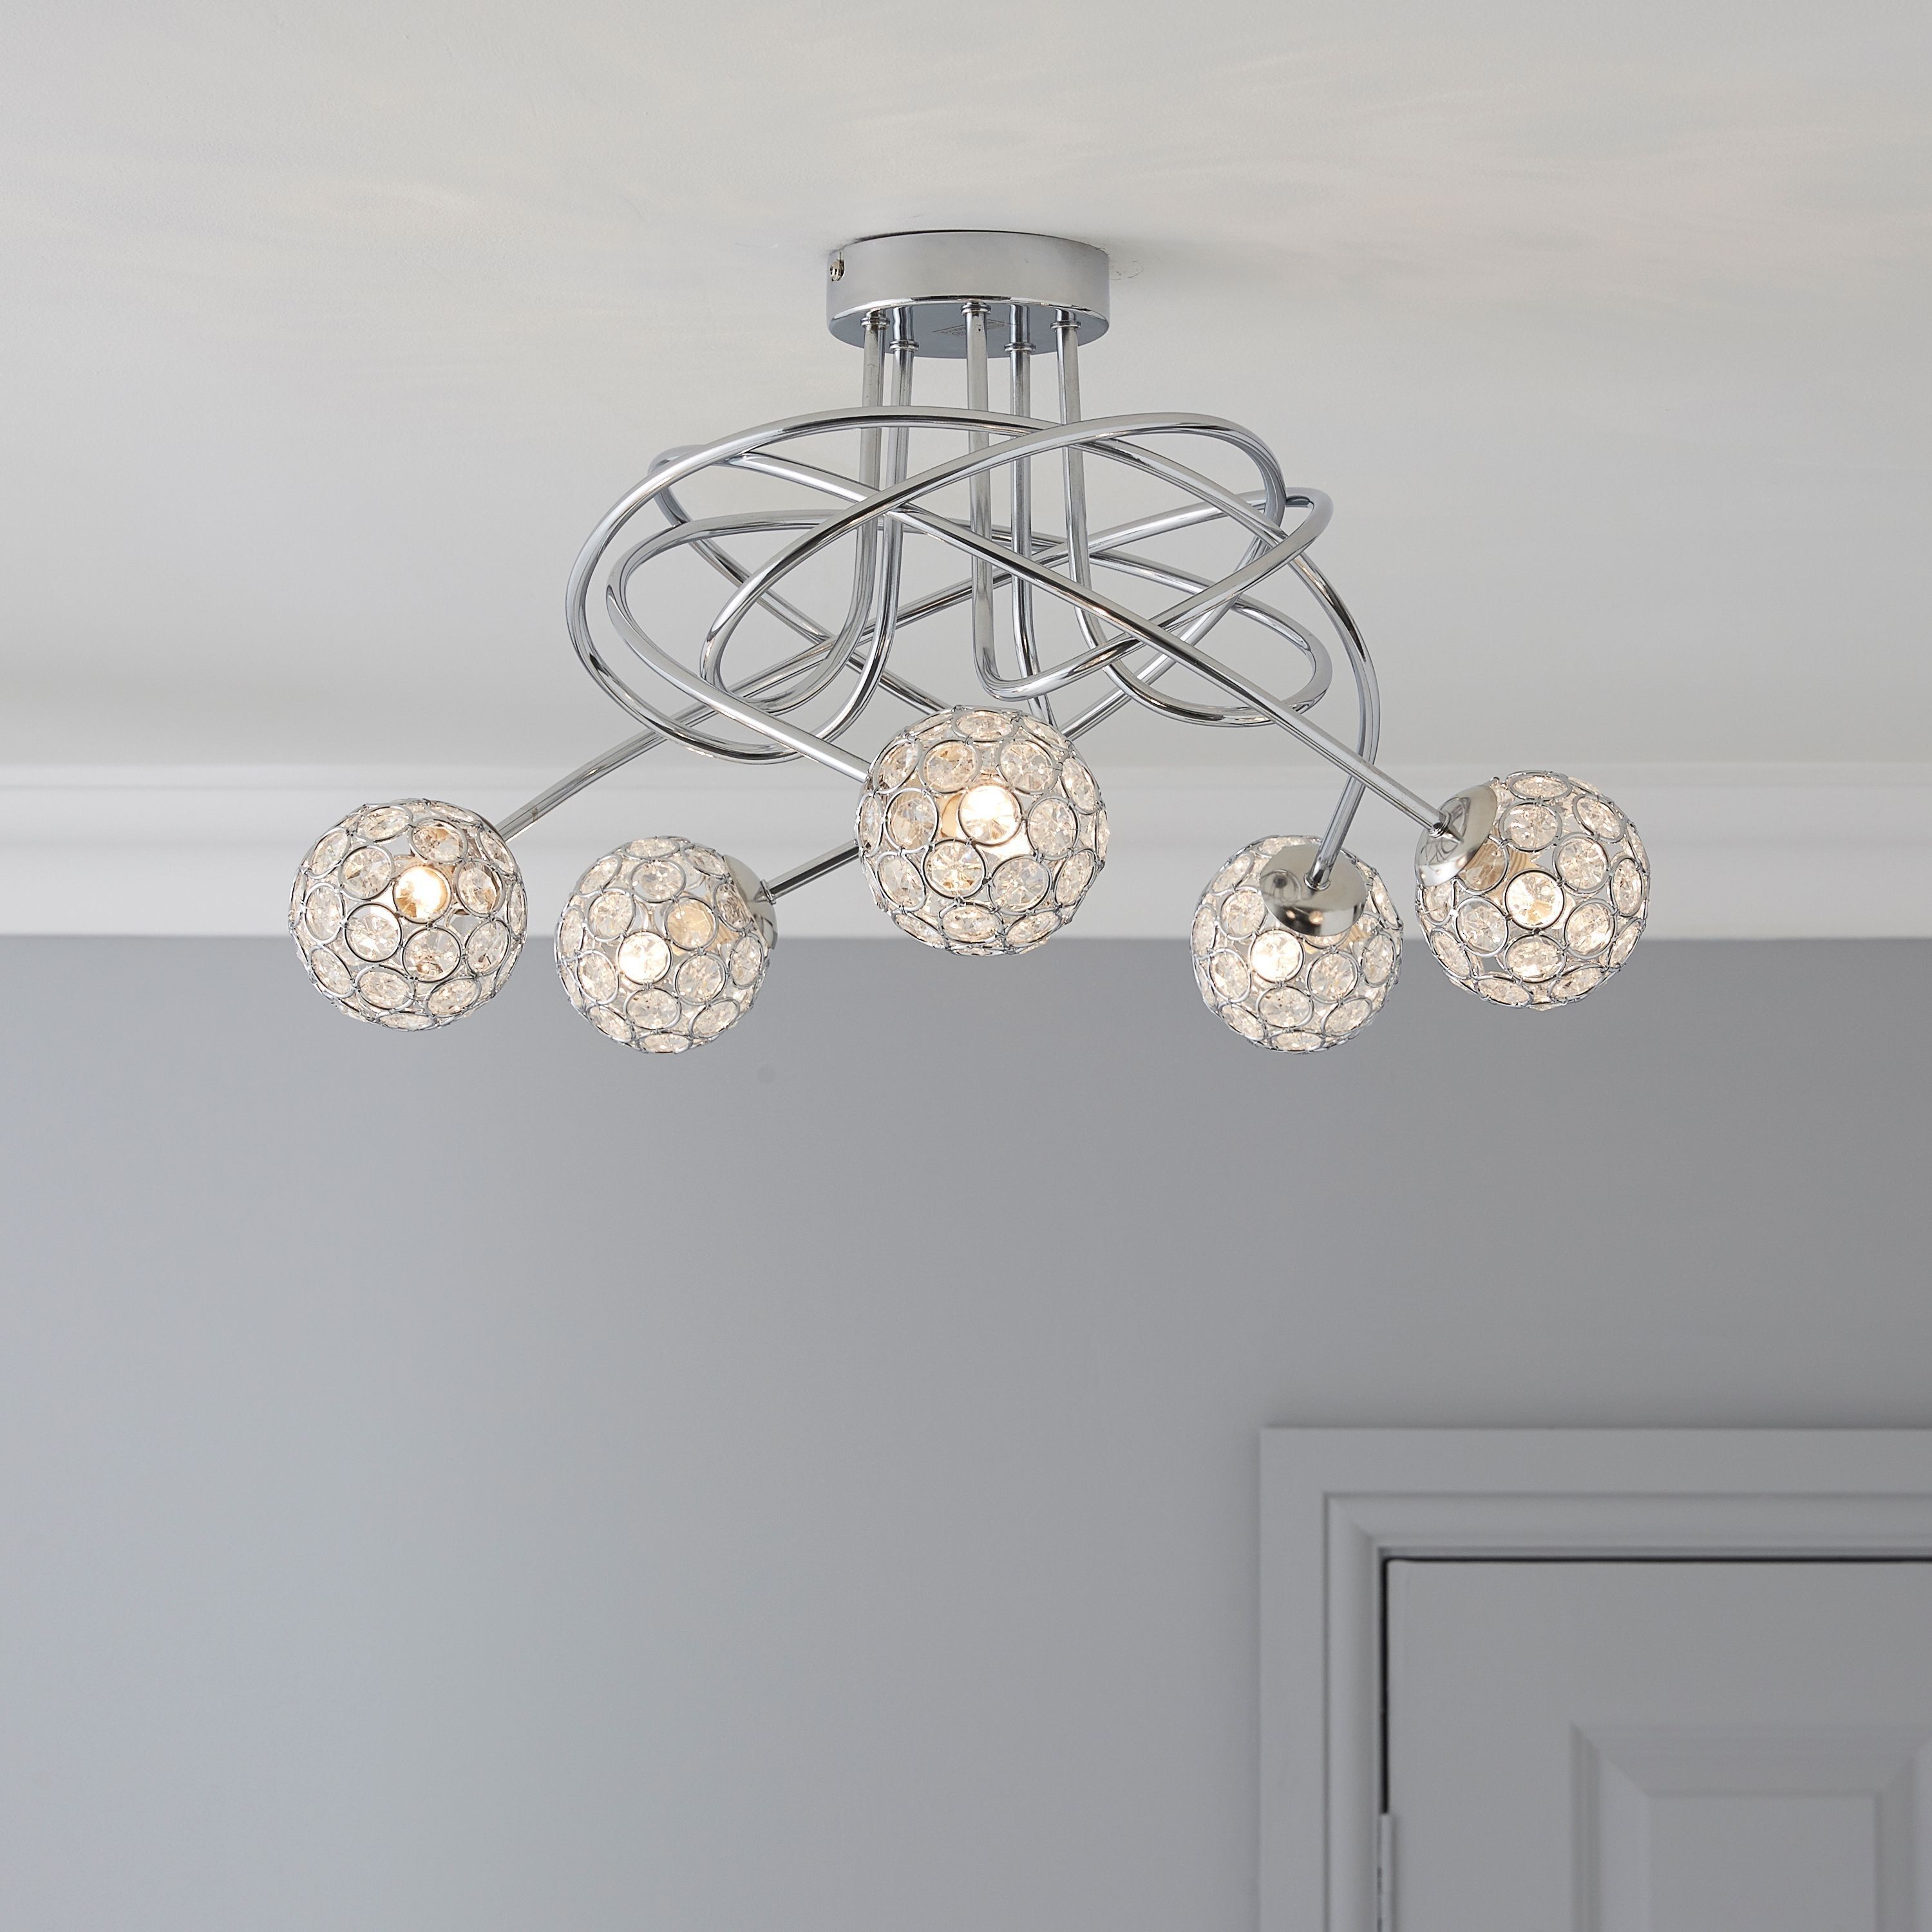 Featured Photo of The Best Outdoor Ceiling Lights at B&q